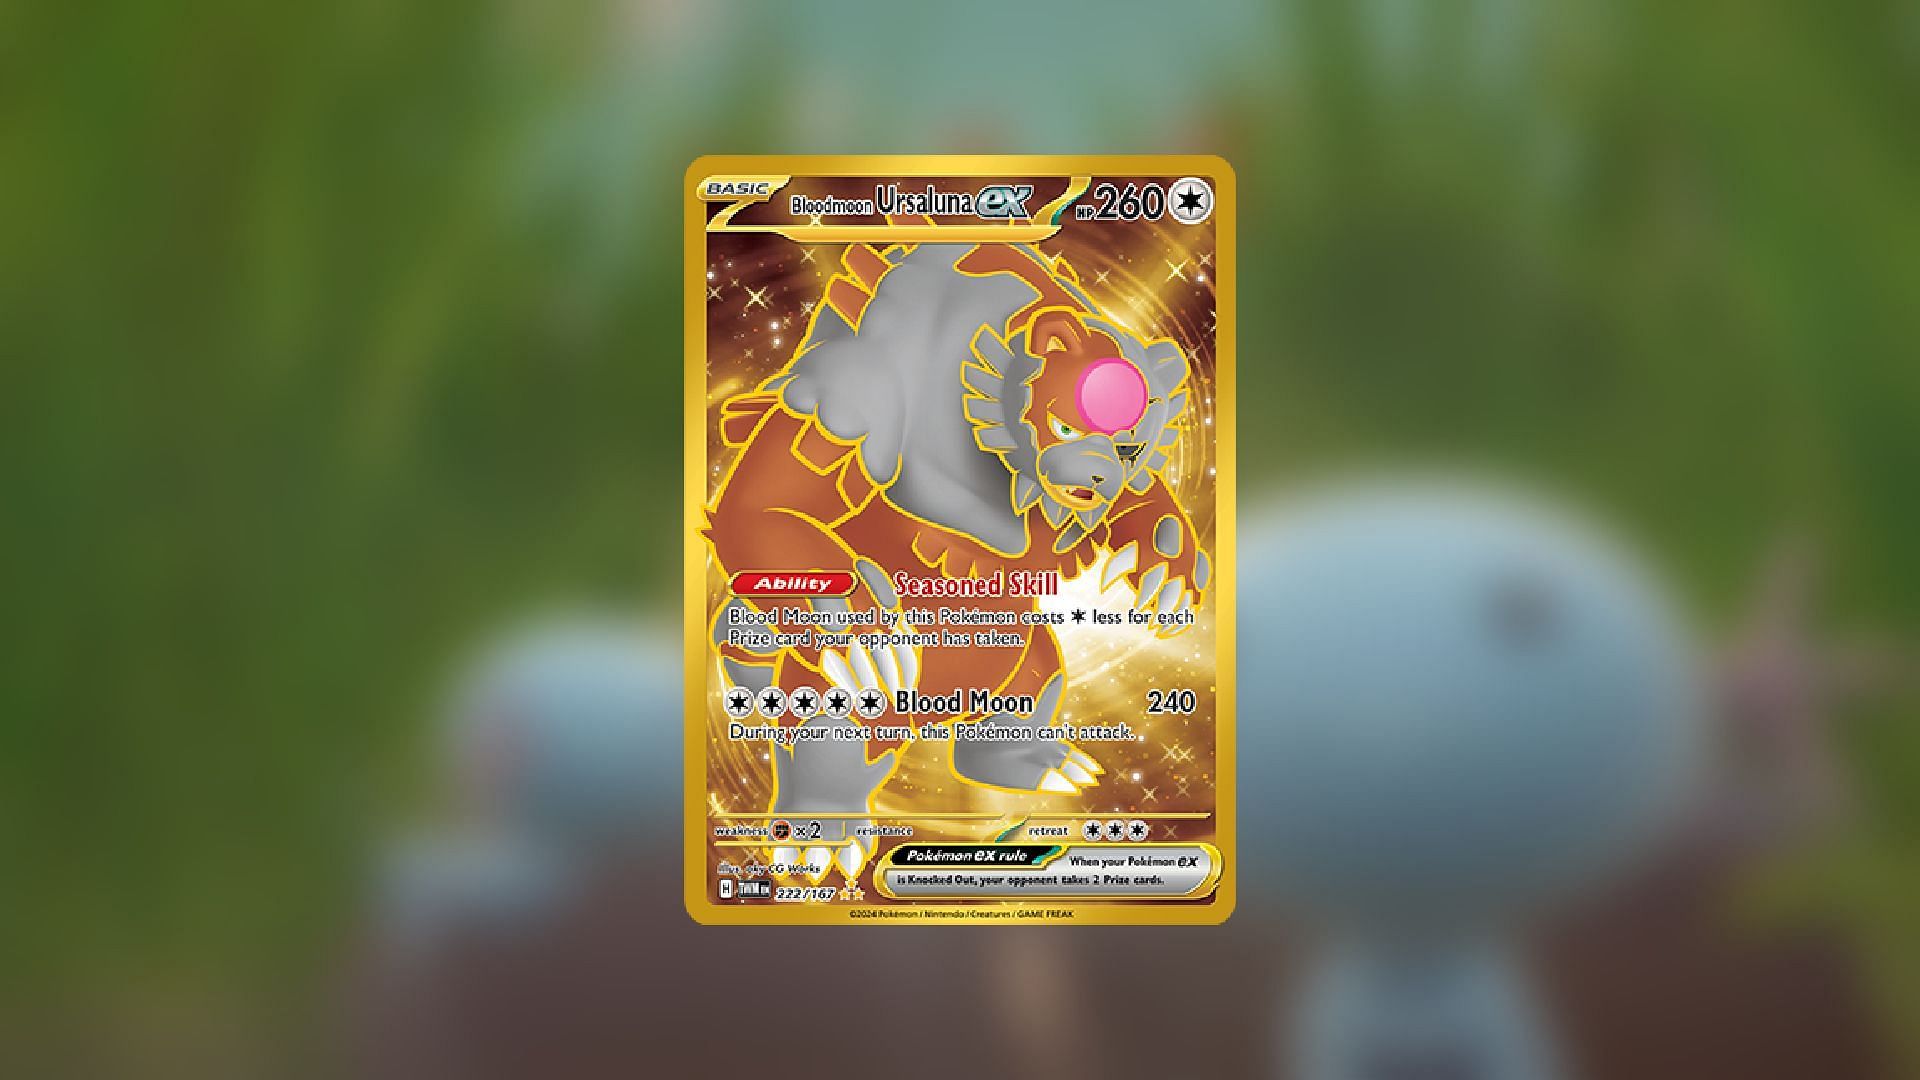 Bloodmoon Ursaluna features a potent ability that can bring players back from a losing game (Image via The Pokemon Company)